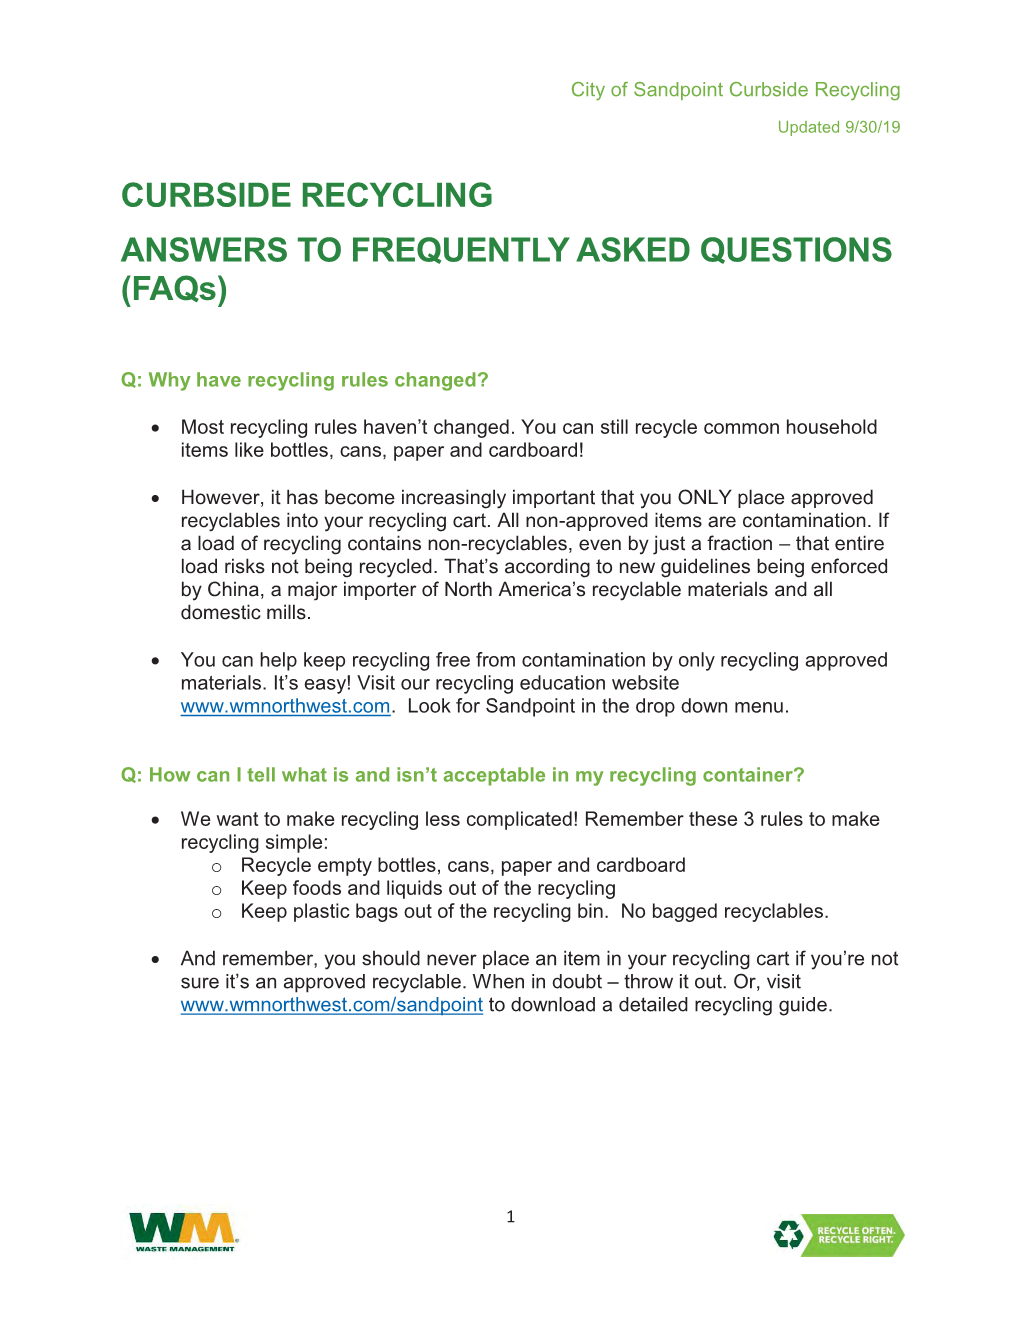 CURBSIDE RECYCLING ANSWERS to FREQUENTLY ASKED QUESTIONS (Faqs)